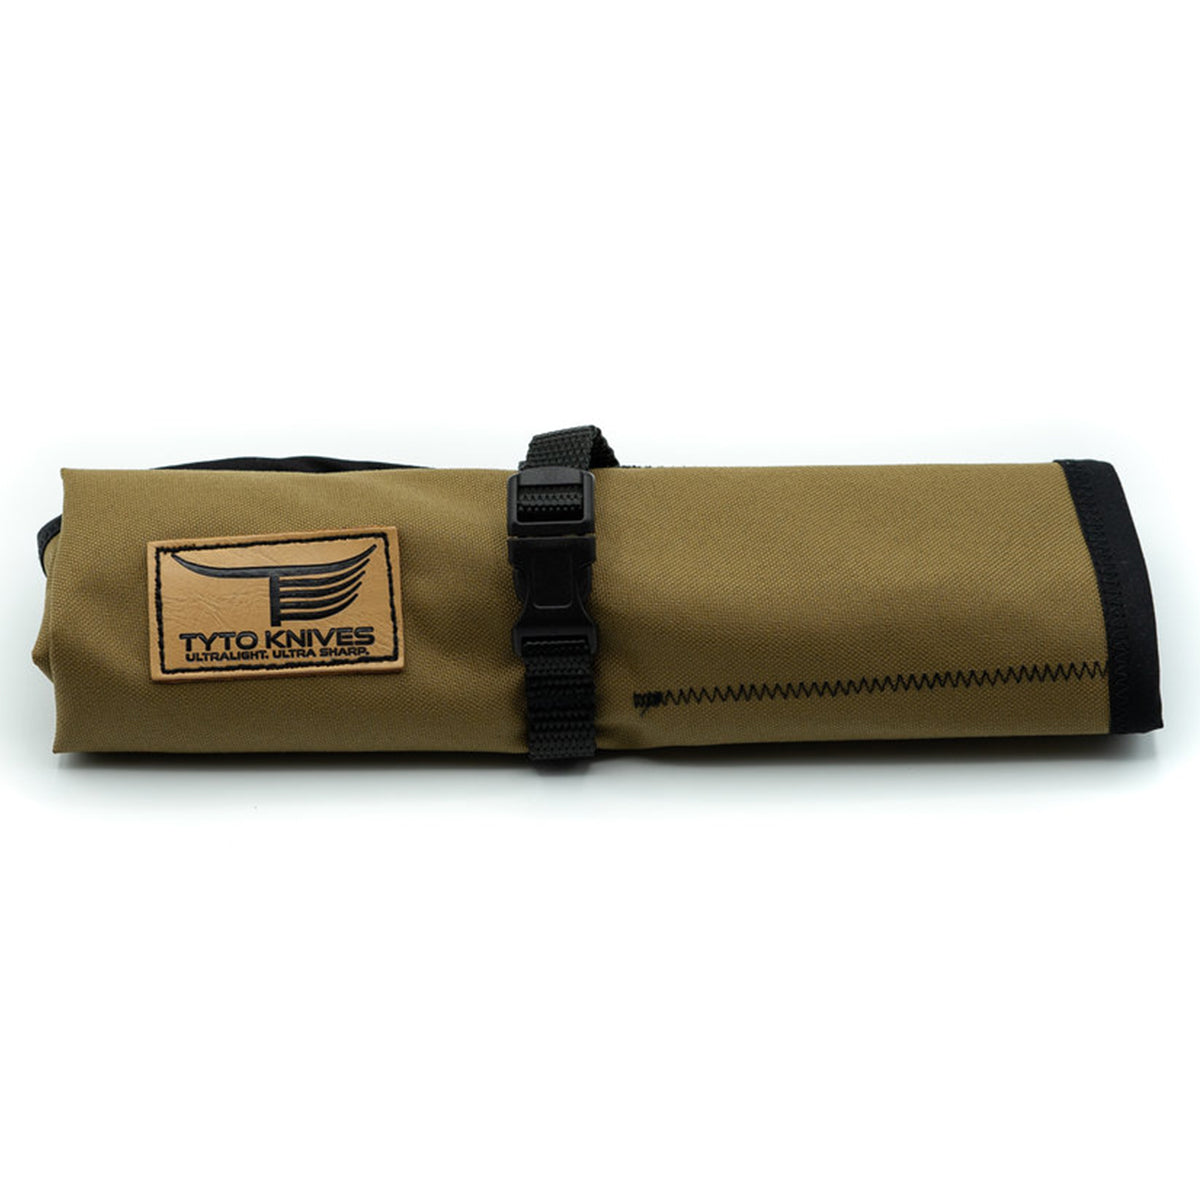 Tyto Backcountry Roll in Tyto Backcountry Roll by Tyto Knives | Gear - goHUNT Shop by GOHUNT | Tyto Knives - GOHUNT Shop